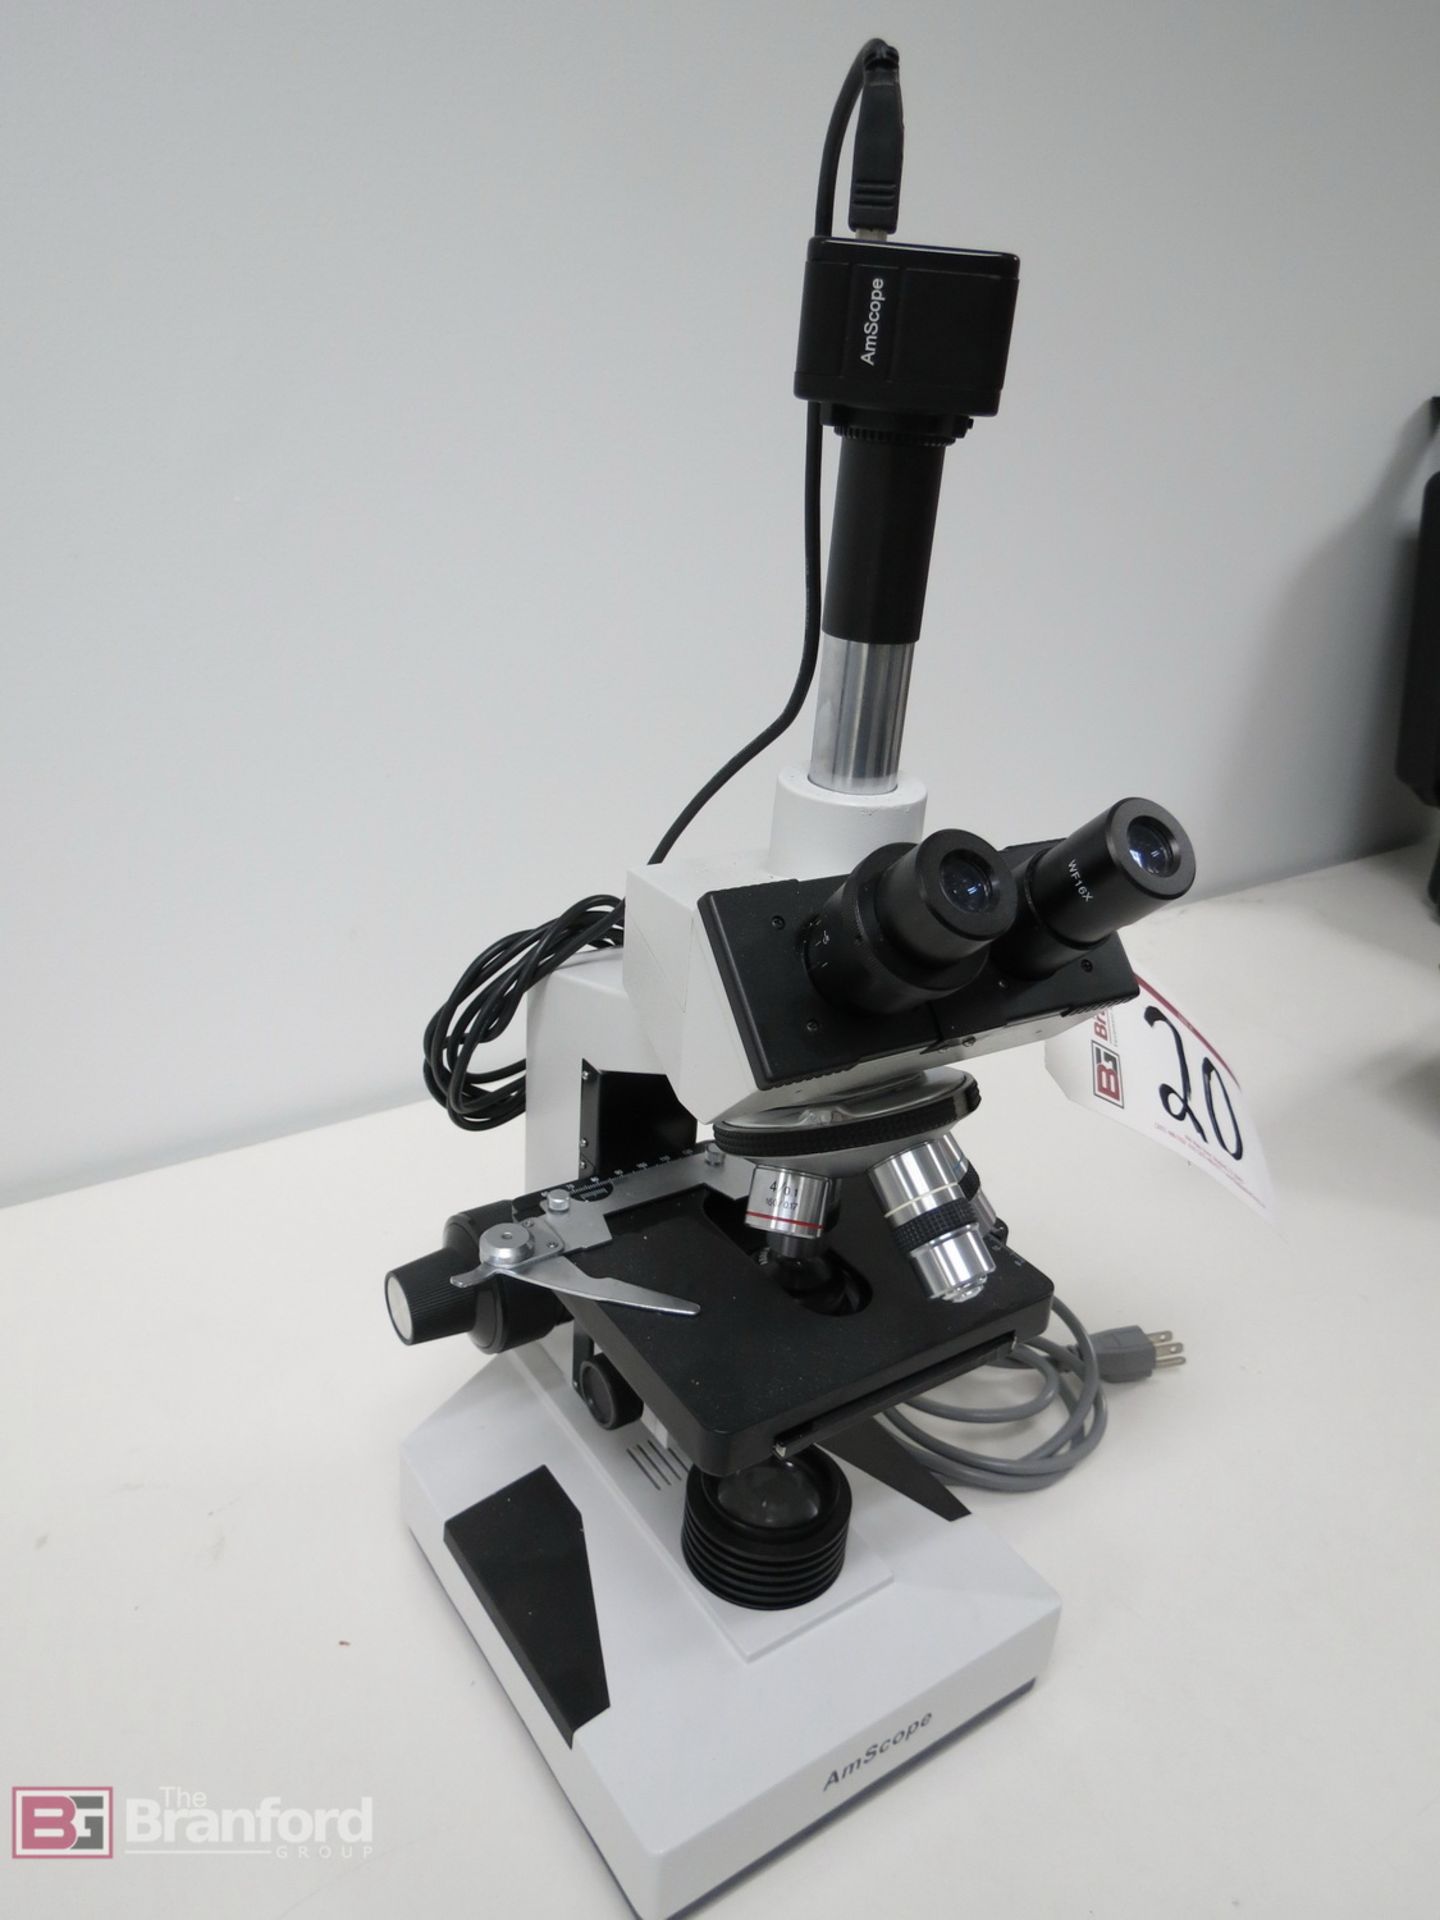 AmScope Stereo Zoom Microscope - Image 2 of 7